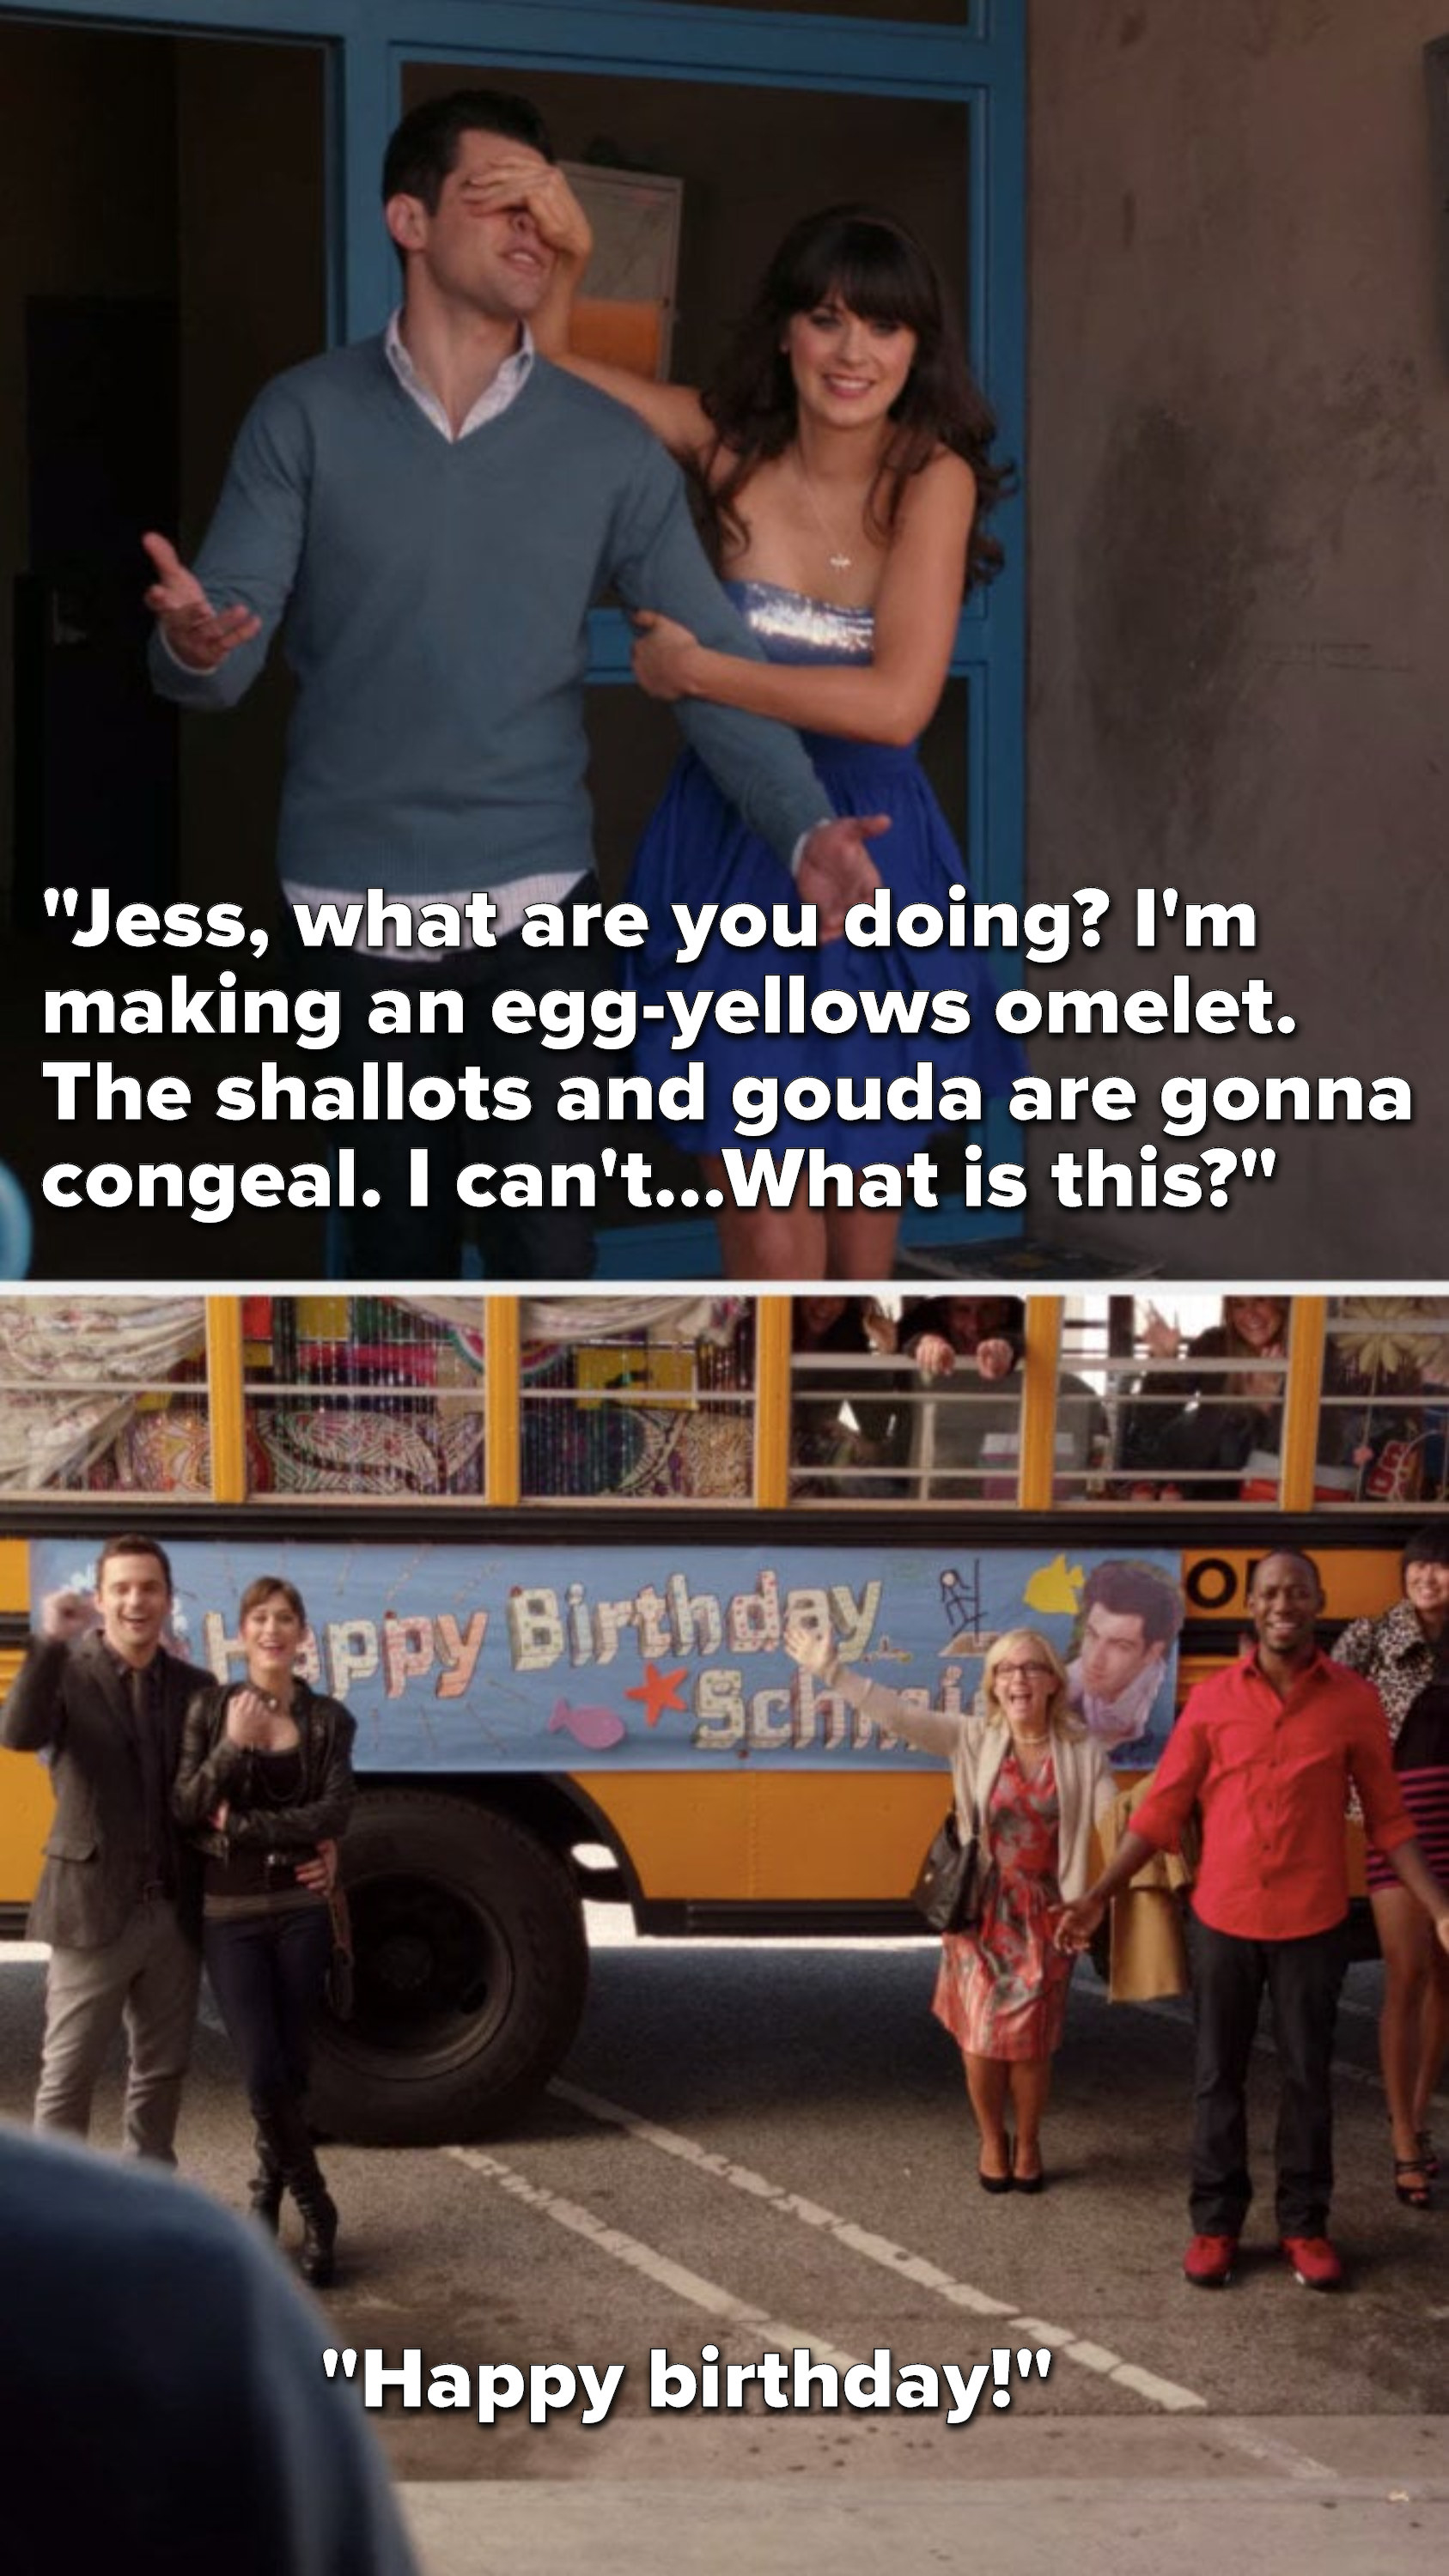 Jess is covering Schmidt&#x27;s eyes and walking him outside, he says, &quot;Jess, what are you doing, I&#x27;m making an egg-yellows omelet, the shallots and gouda are gonna congeal, I can&#x27;t, what is this,&quot; everyone in front of a party bus says, &quot;Happy birthday&quot;